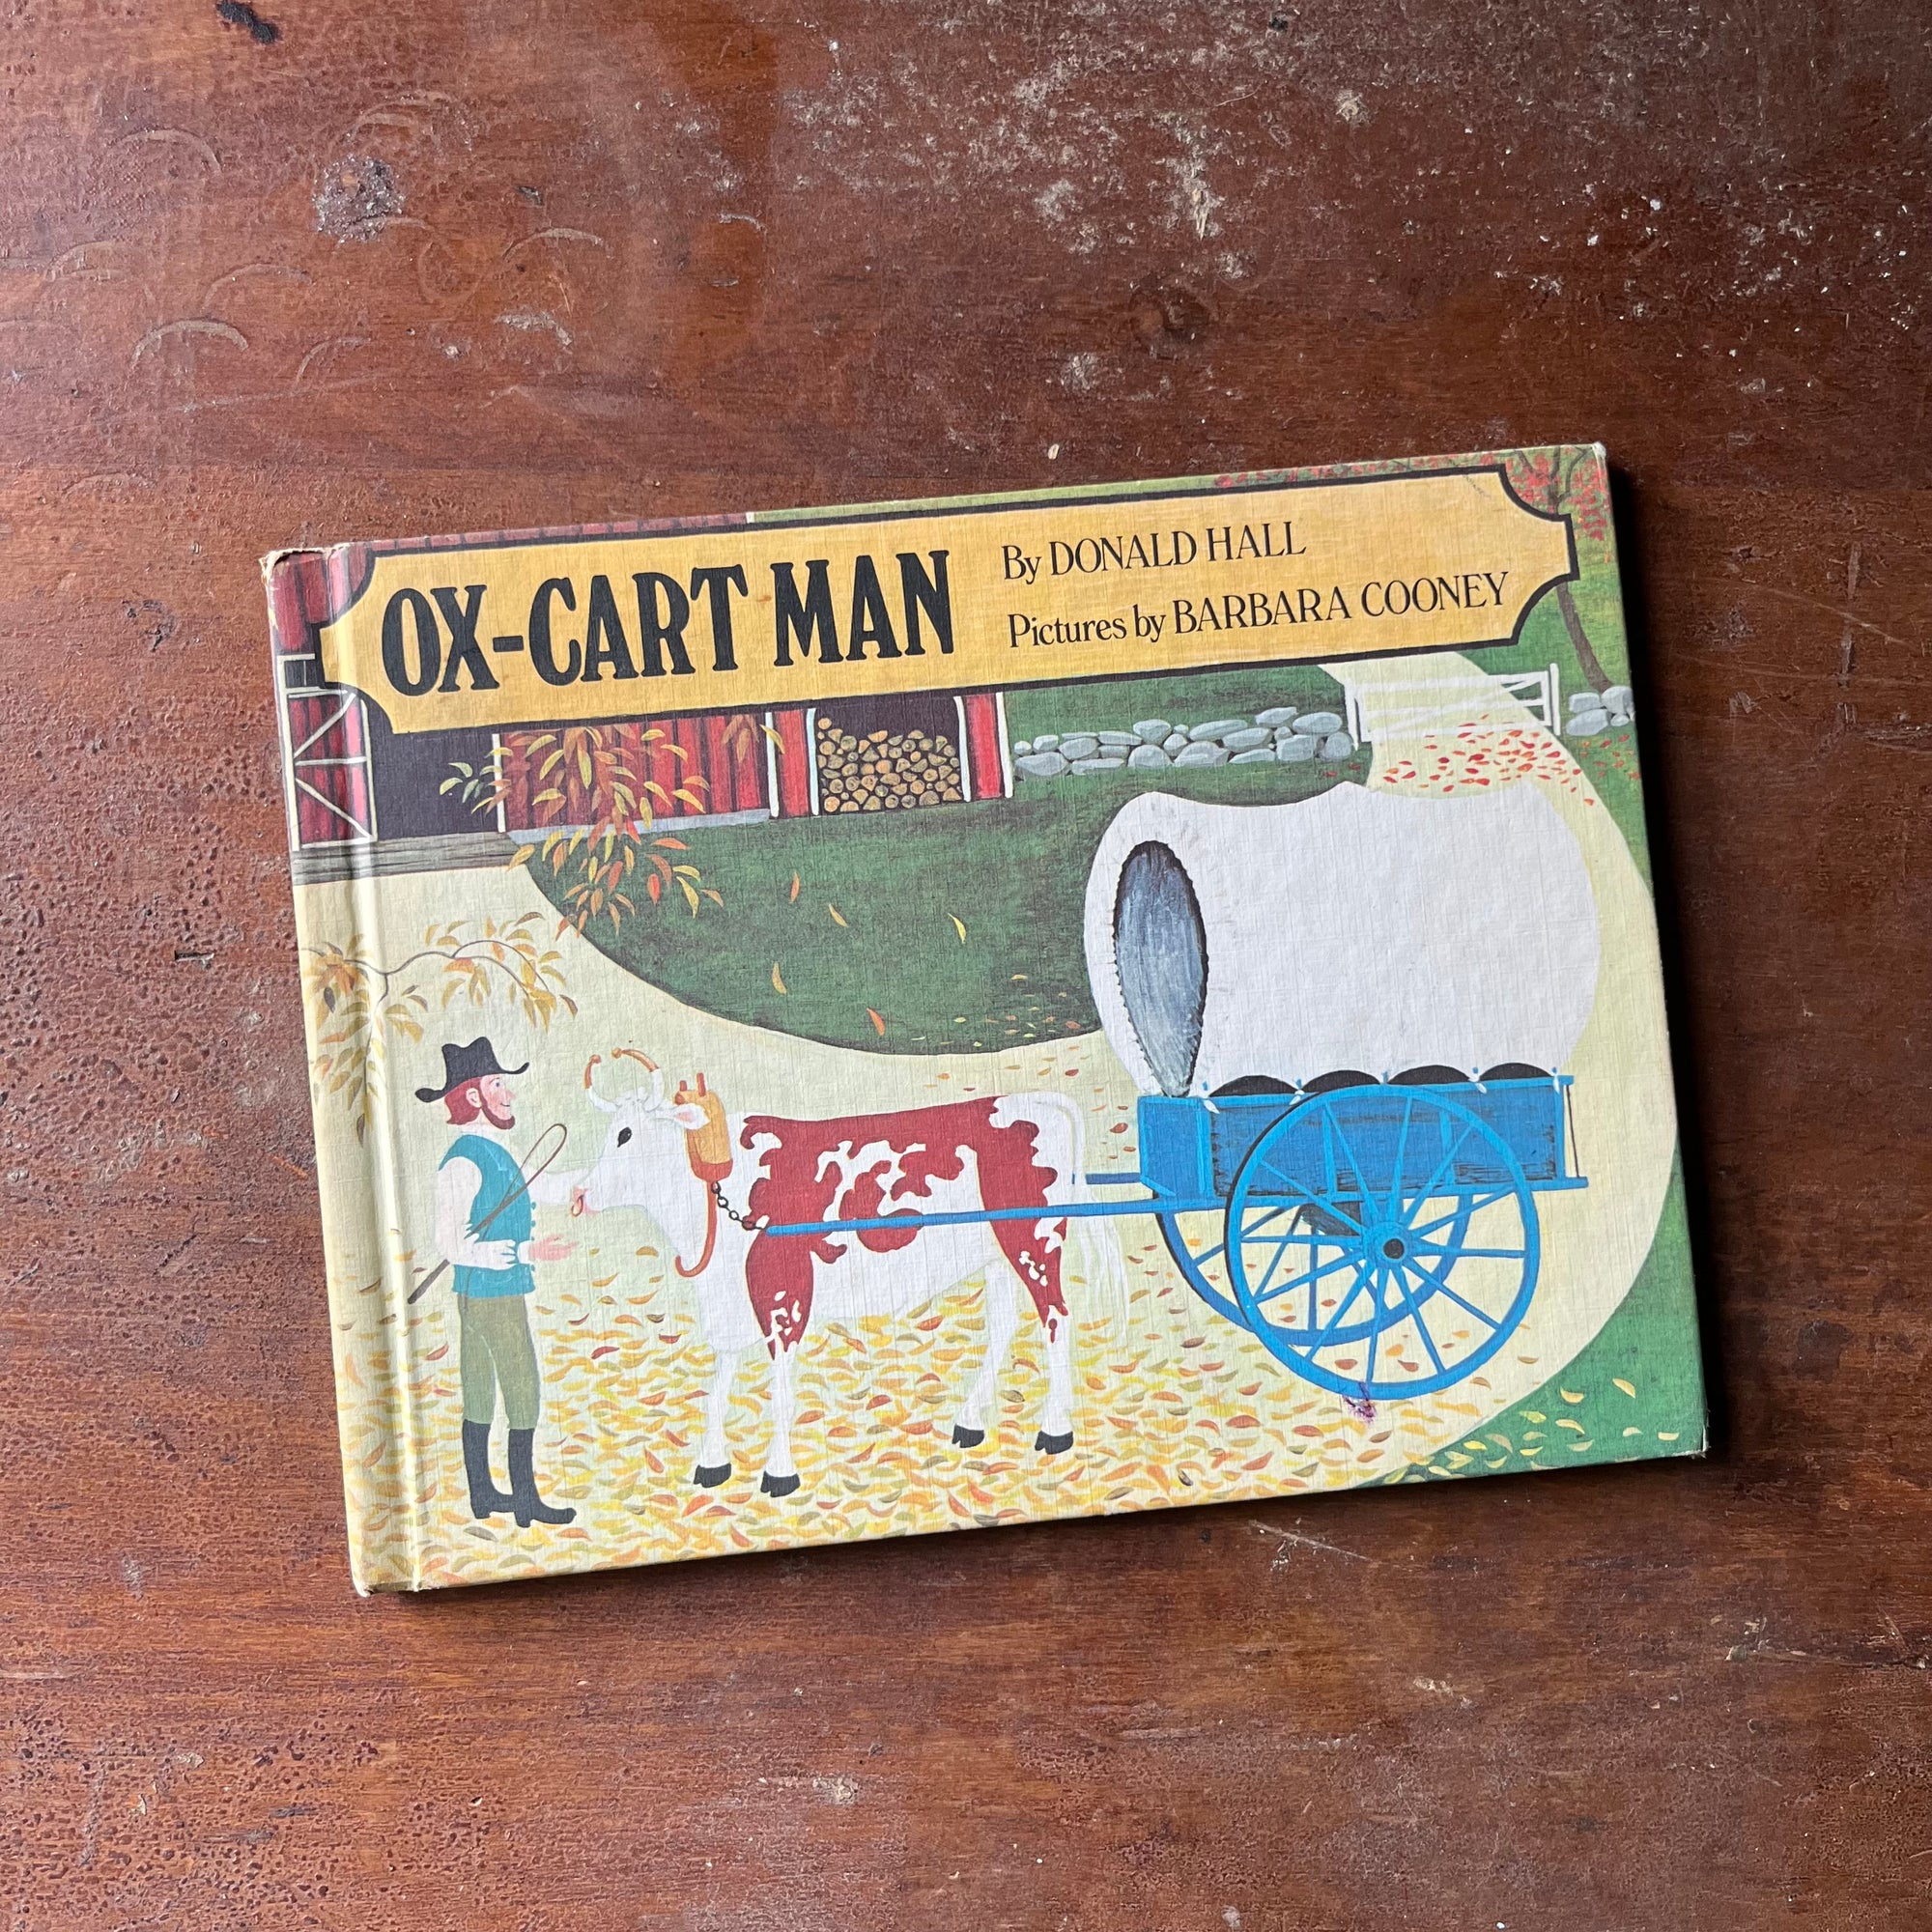 vintage children's picture book, 1980 Caldecott Medal Winner - Ox-Man Cart written by Donald Hall with illustrations by Barbara Cooney - view of the front cover with an illustration of the Man & is ox & cart